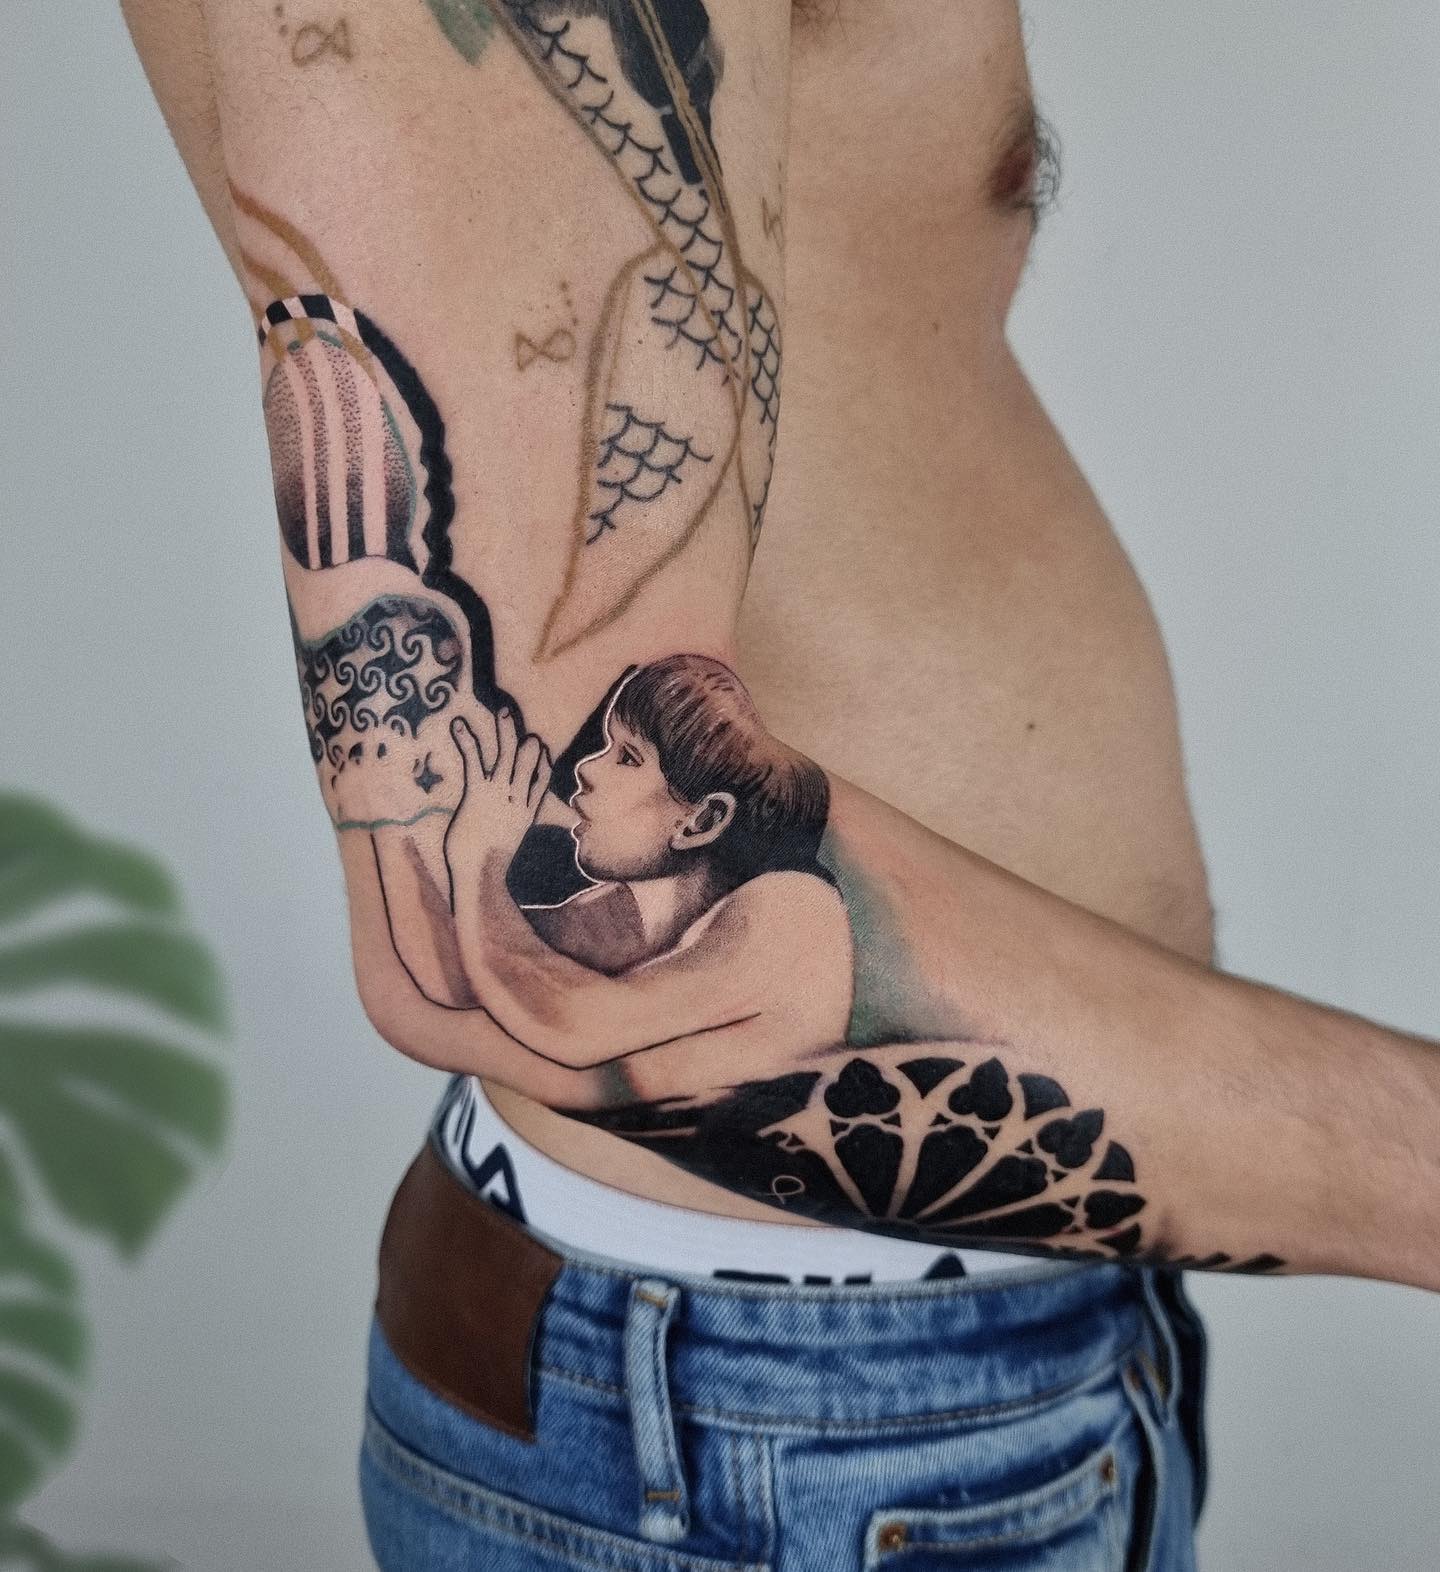 A fun print and something as creative as this is for those who like creativity and pop art. Show that you’re into fun stories and that your very own tattoo can tell a story, especially when done the right way and by the right tattoo artist.